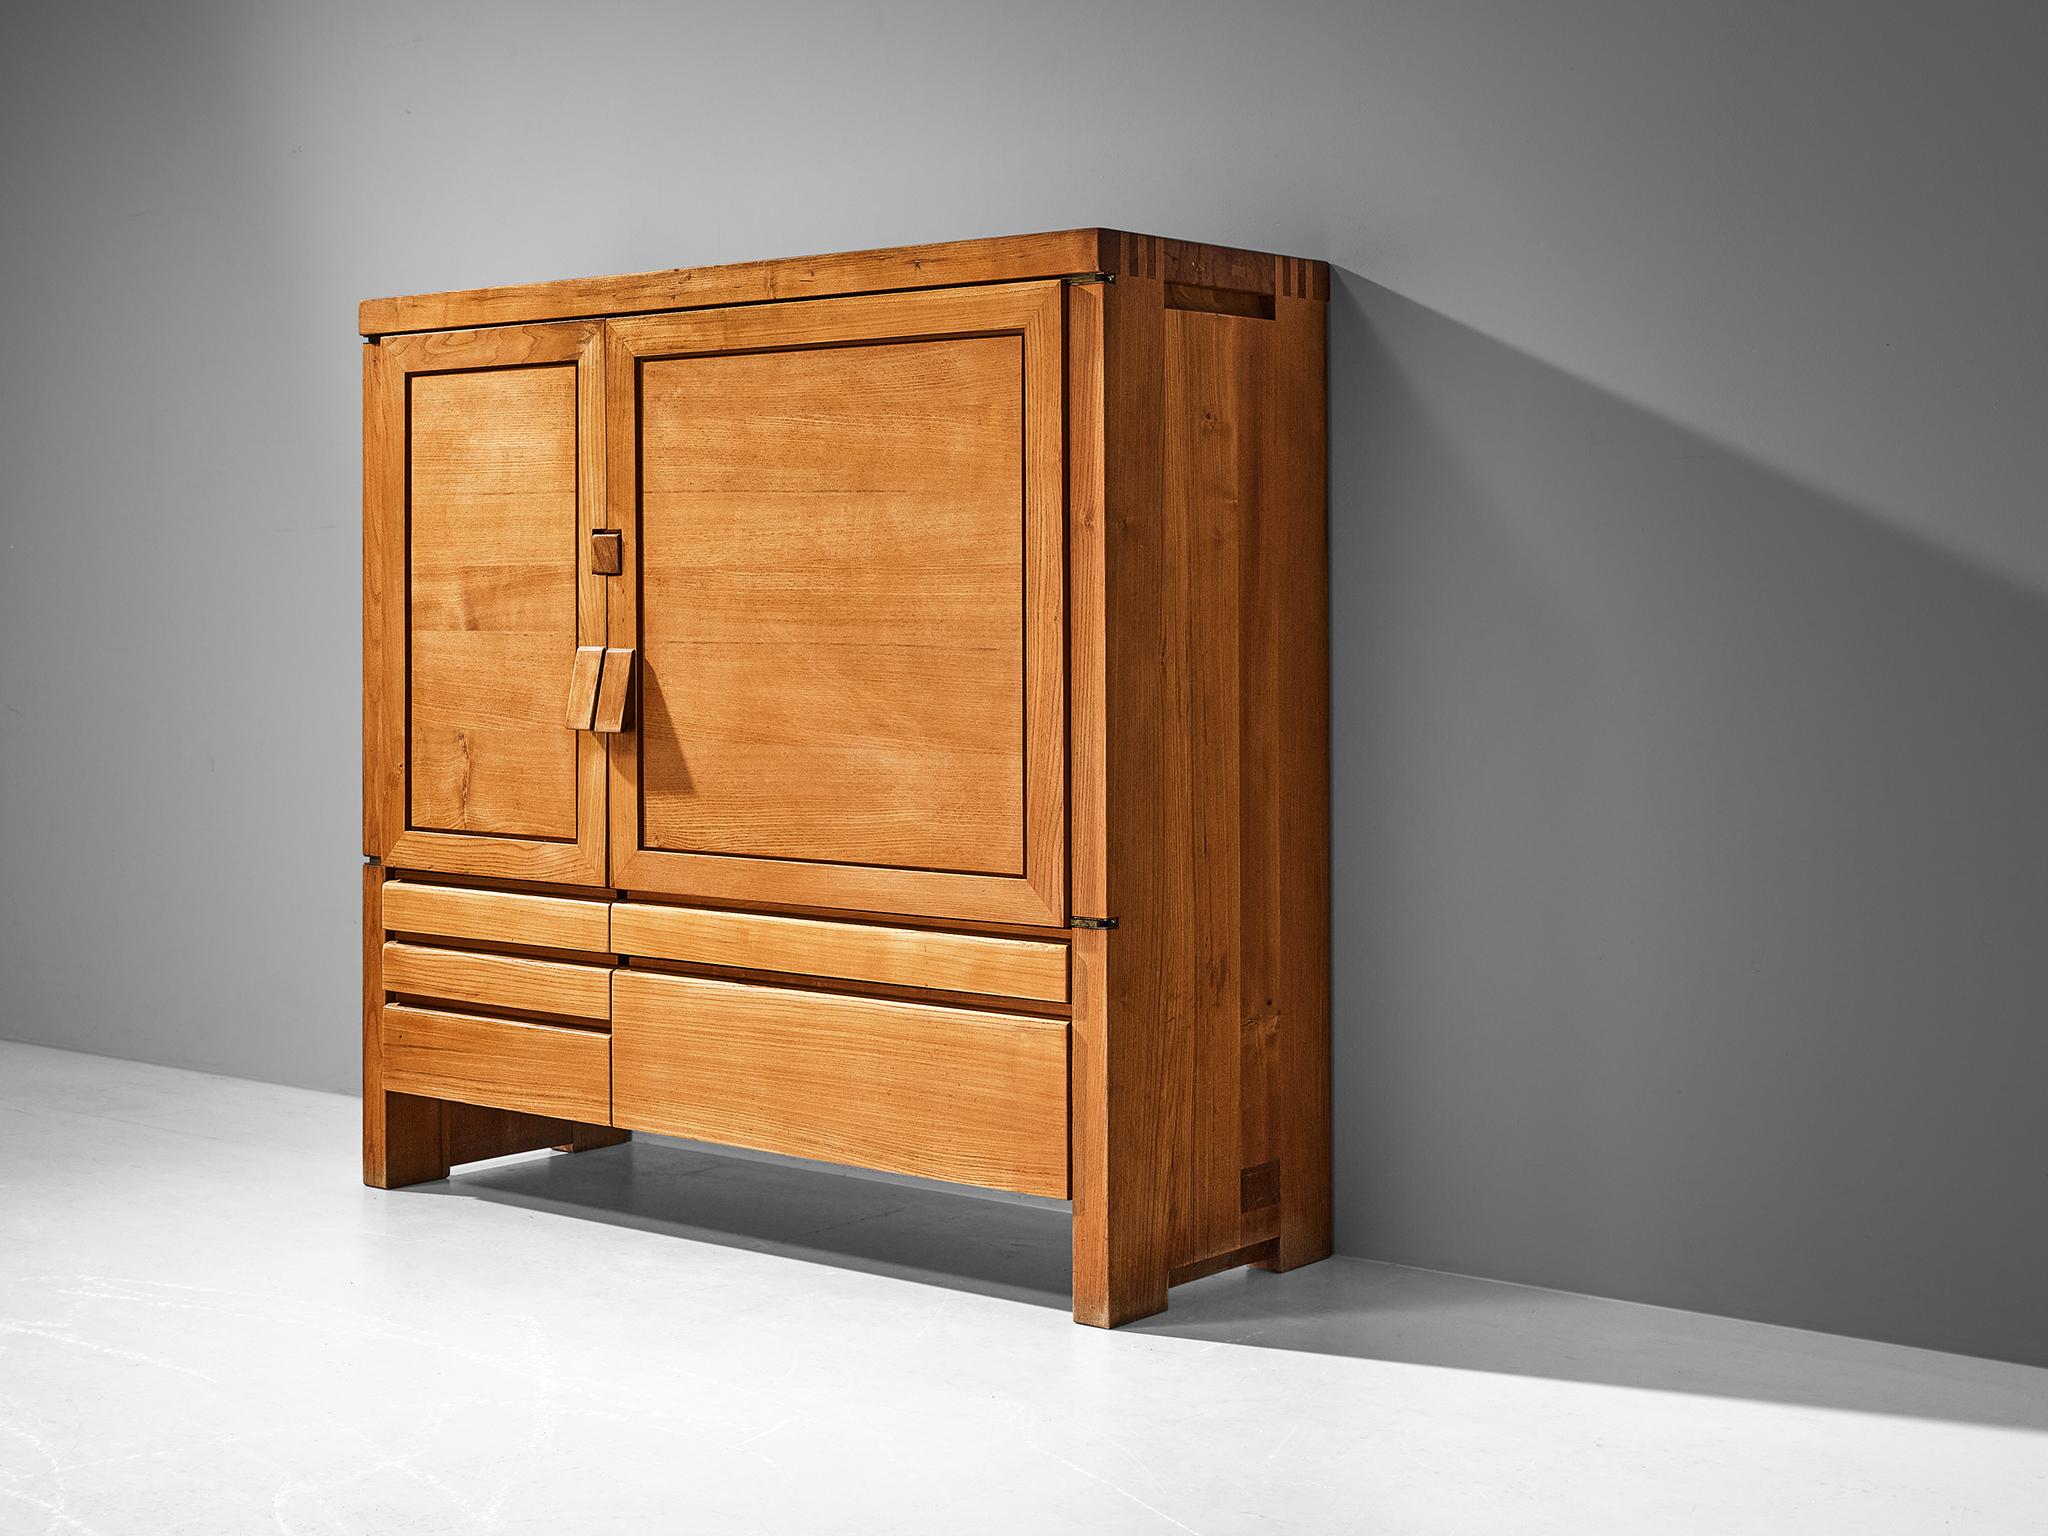 Pierre Chapo, cabinet model 'R18', solid elm, France, late 1960s.

This exquisitely crafted 'R18' cabinet combines a simplified yet complex design combined with nifty, solid construction details that characterize Chapo's work. Two doors of